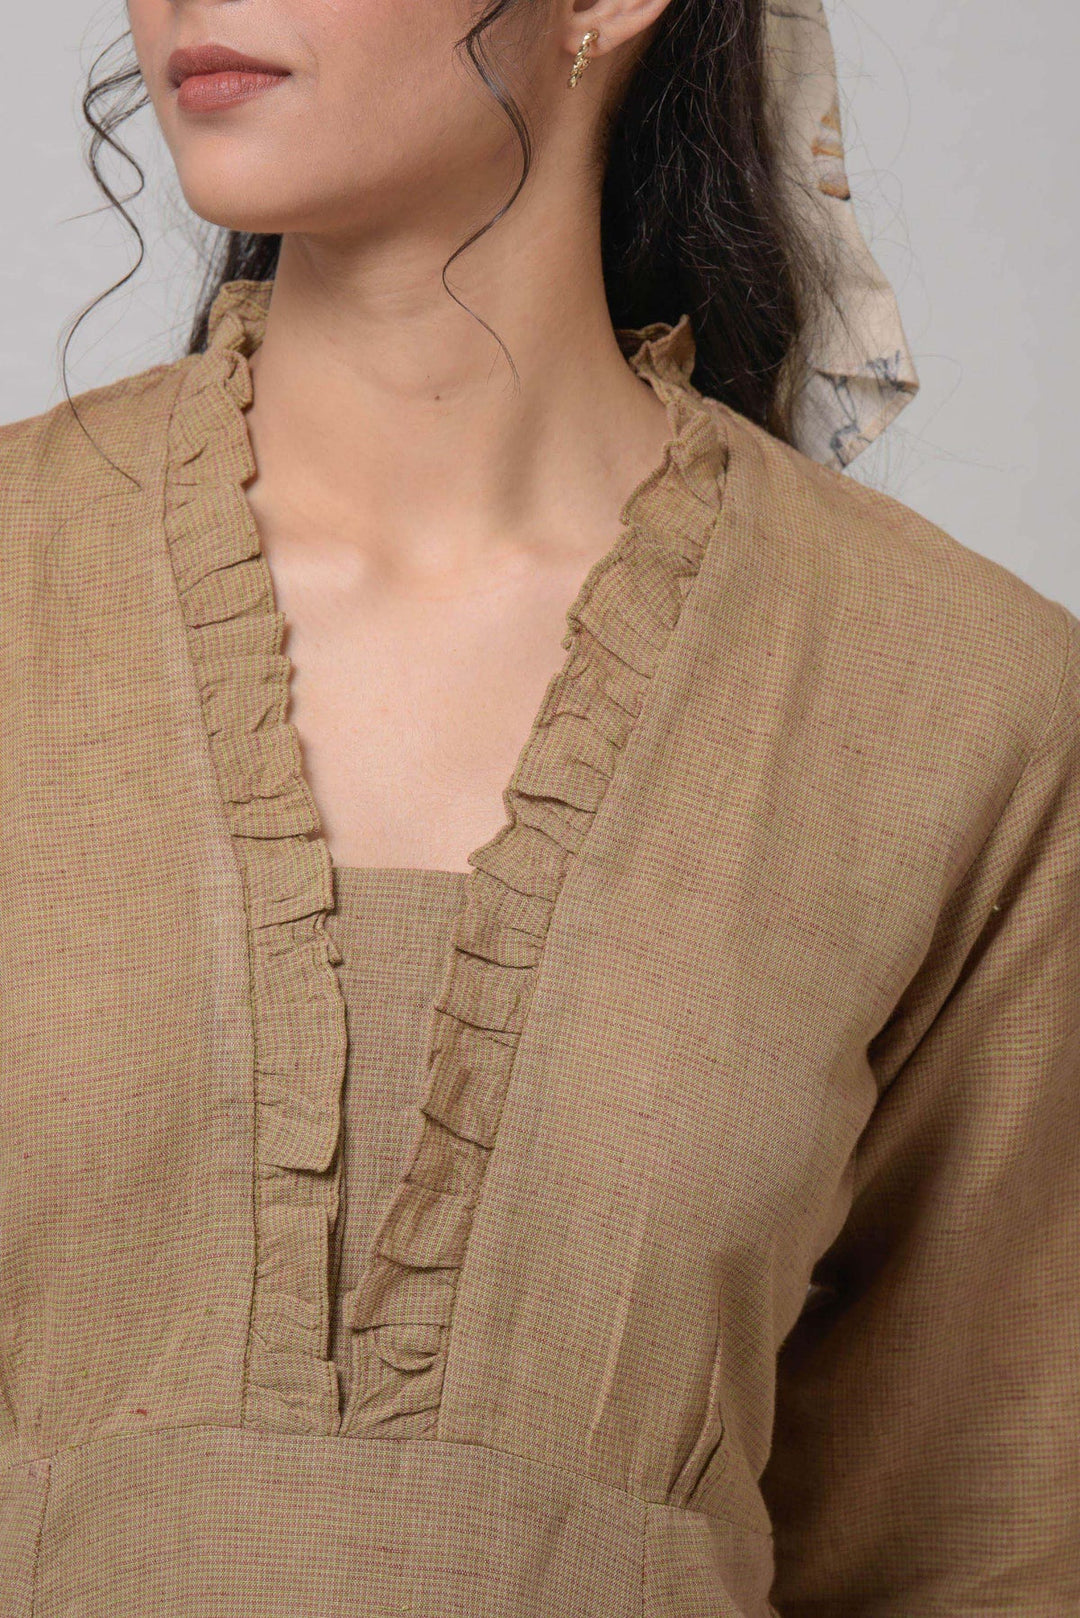 Handwoven Cotton Dress with Fringe Accents | Koko Handwoven Cotton Dress - Brown